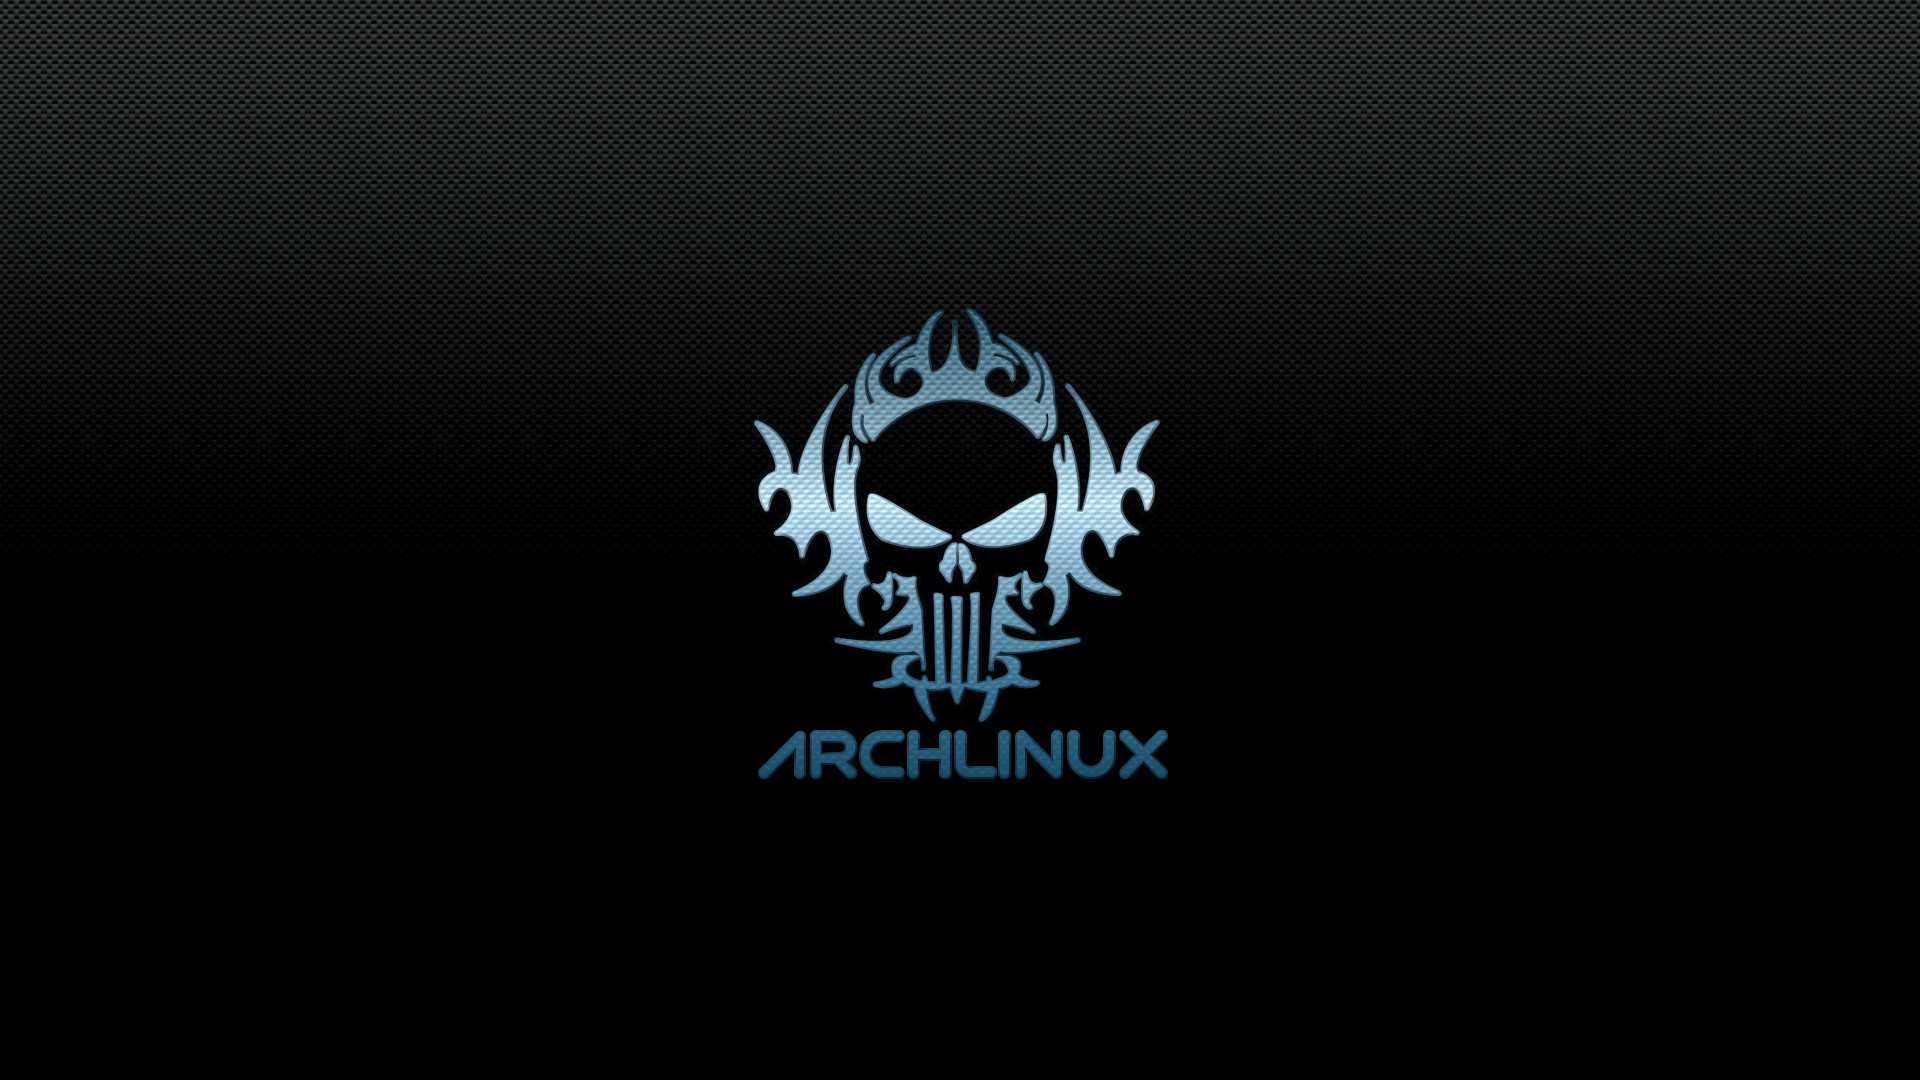 Free Download Arch Linux Black Os Wallpaper Download Wallpaper With 19x1080 19x1080 For Your Desktop Mobile Tablet Explore 49 Linux Wallpaper Download Linux Mint Wallpaper Arch Linux Wallpaper Cool Wallpapers